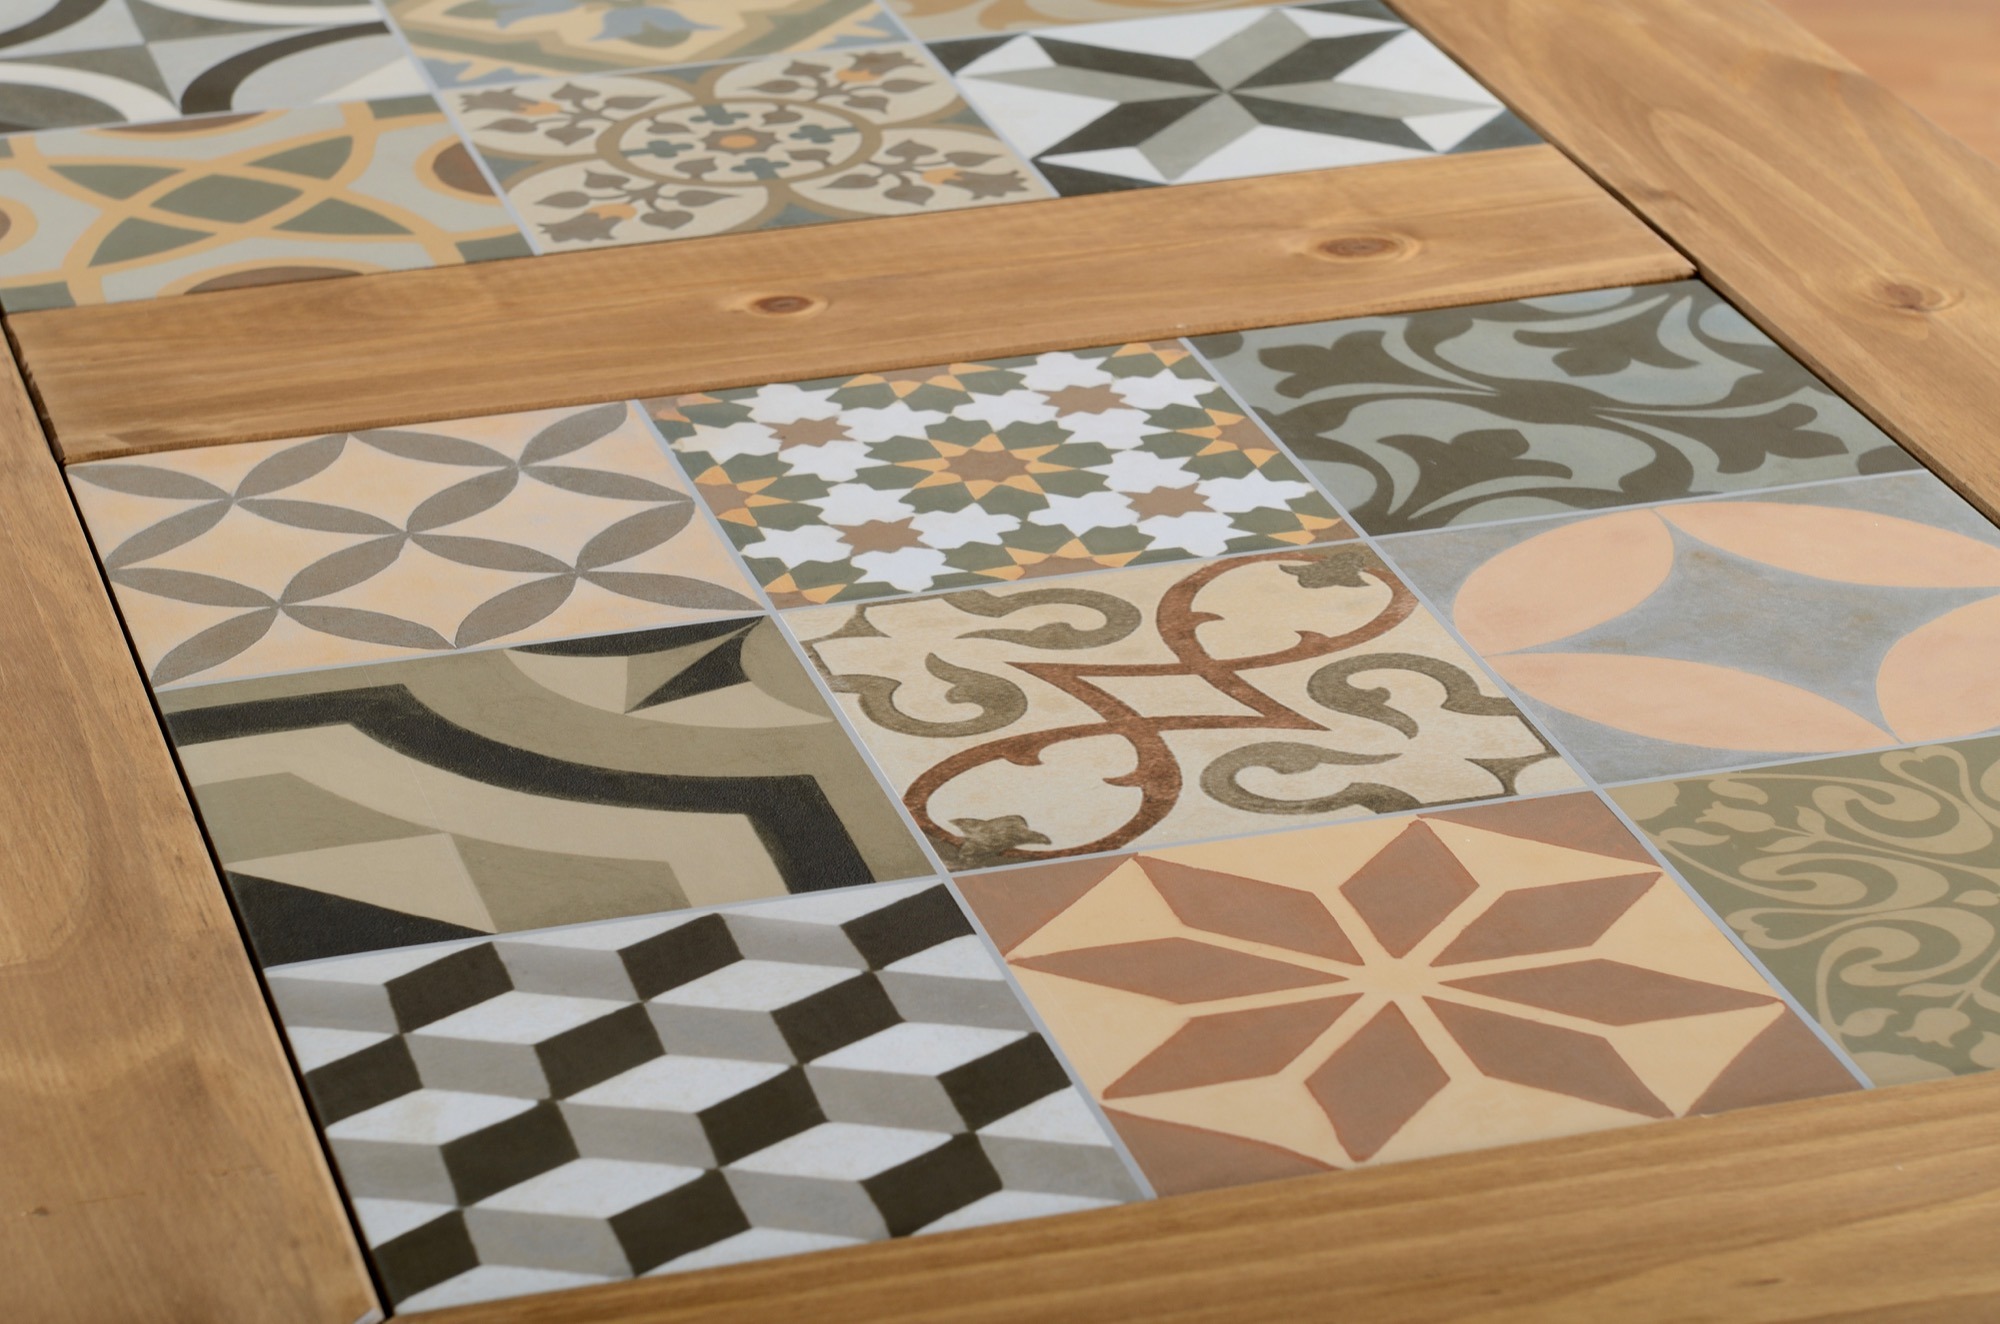 tables tiled